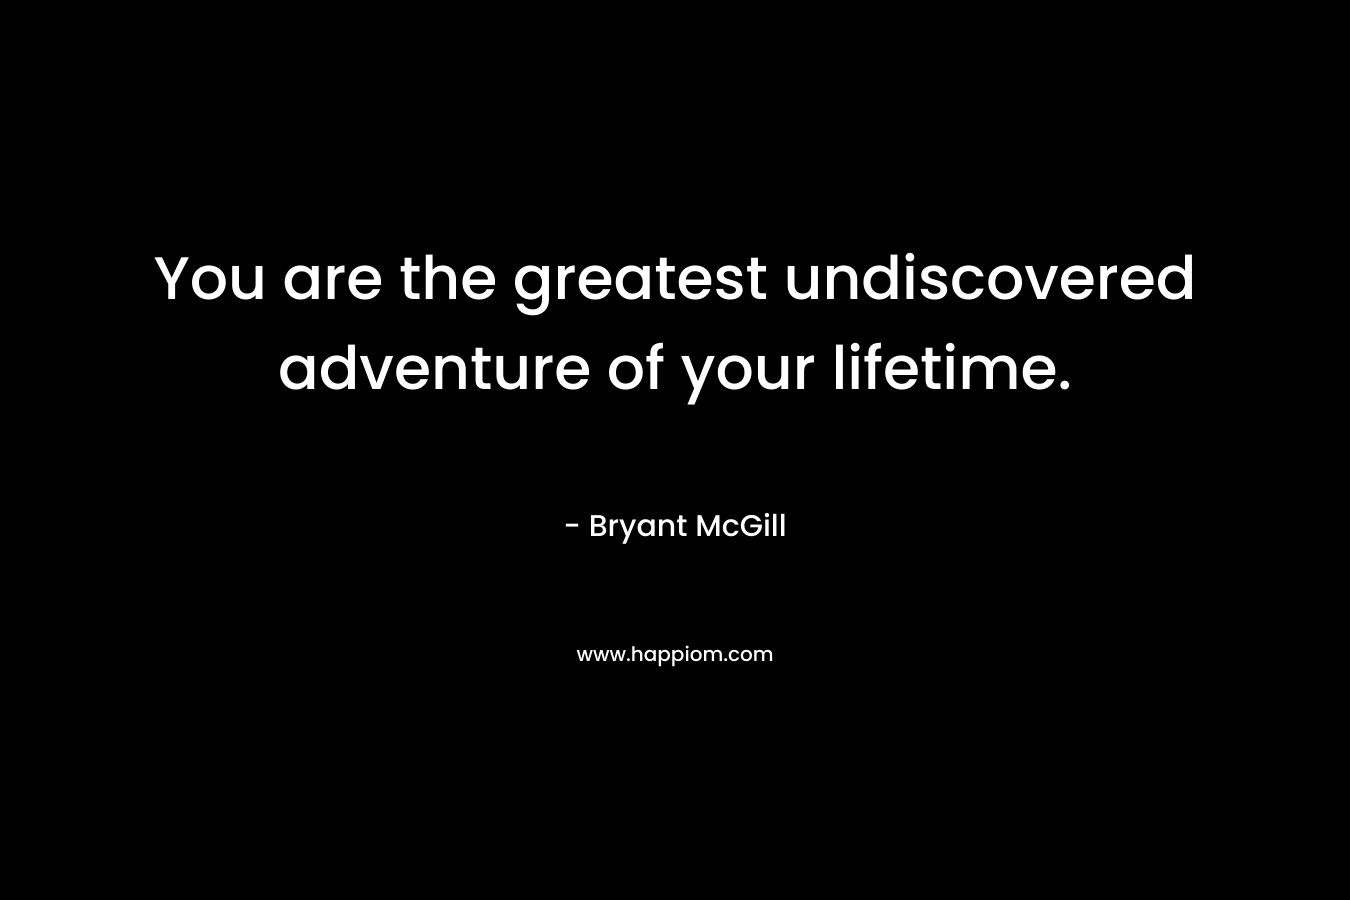 You are the greatest undiscovered adventure of your lifetime.